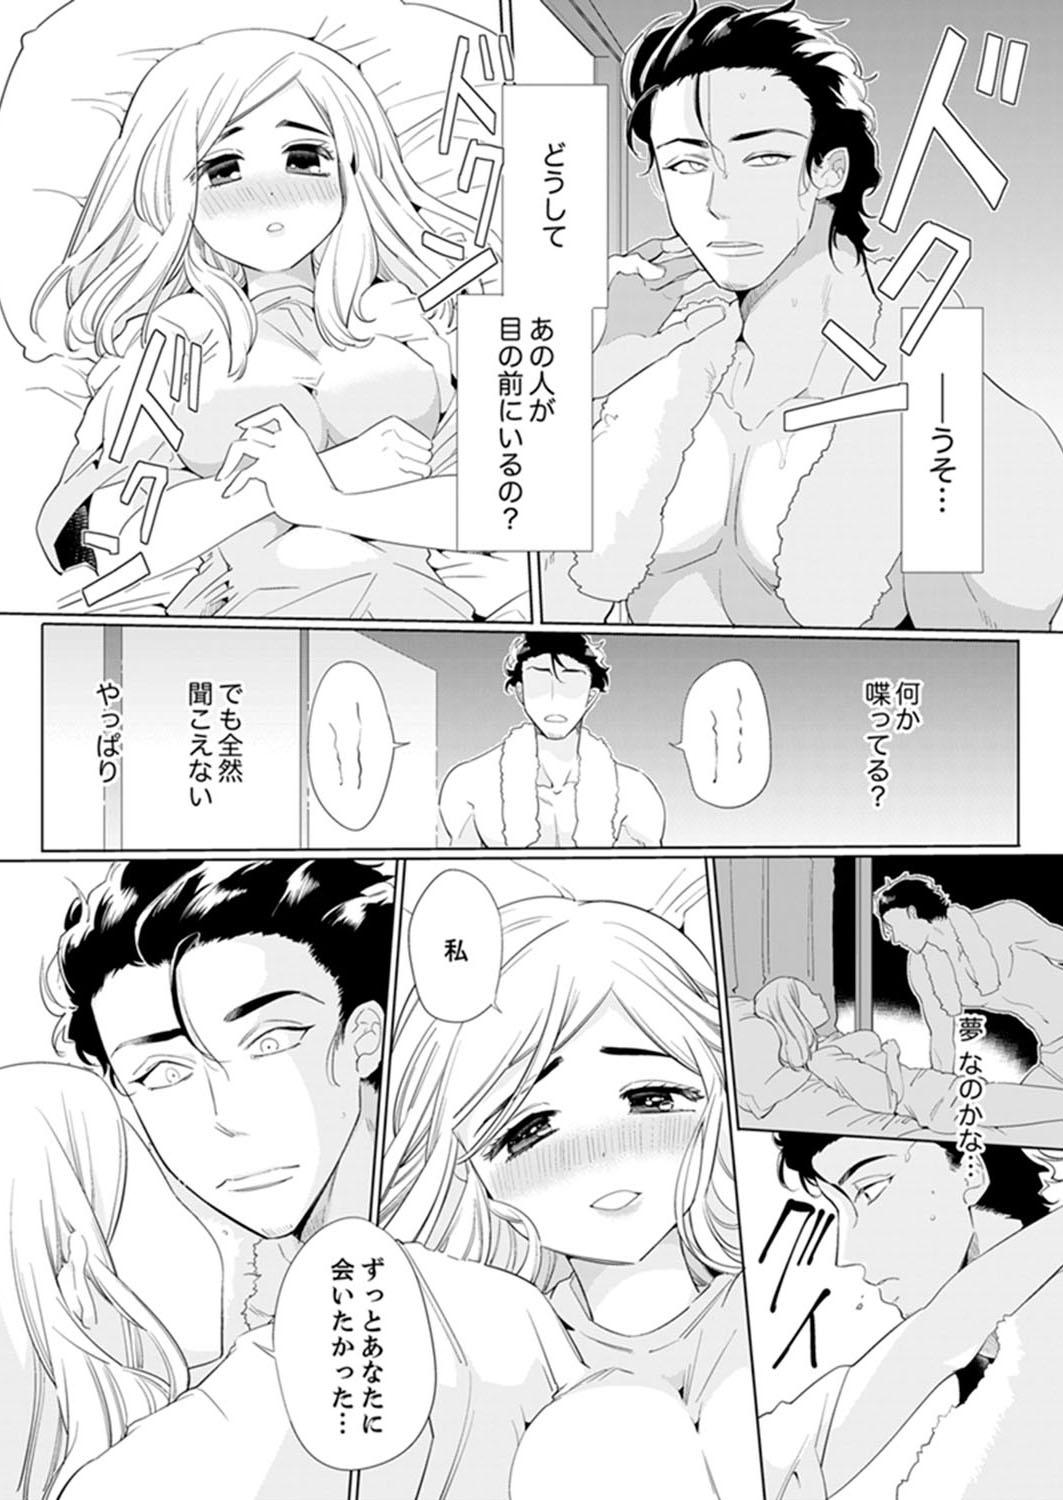 Classic エロ紳士の極上テク～その性感帯、オレが育ててあげる【完全版】 18yearsold - Page 12